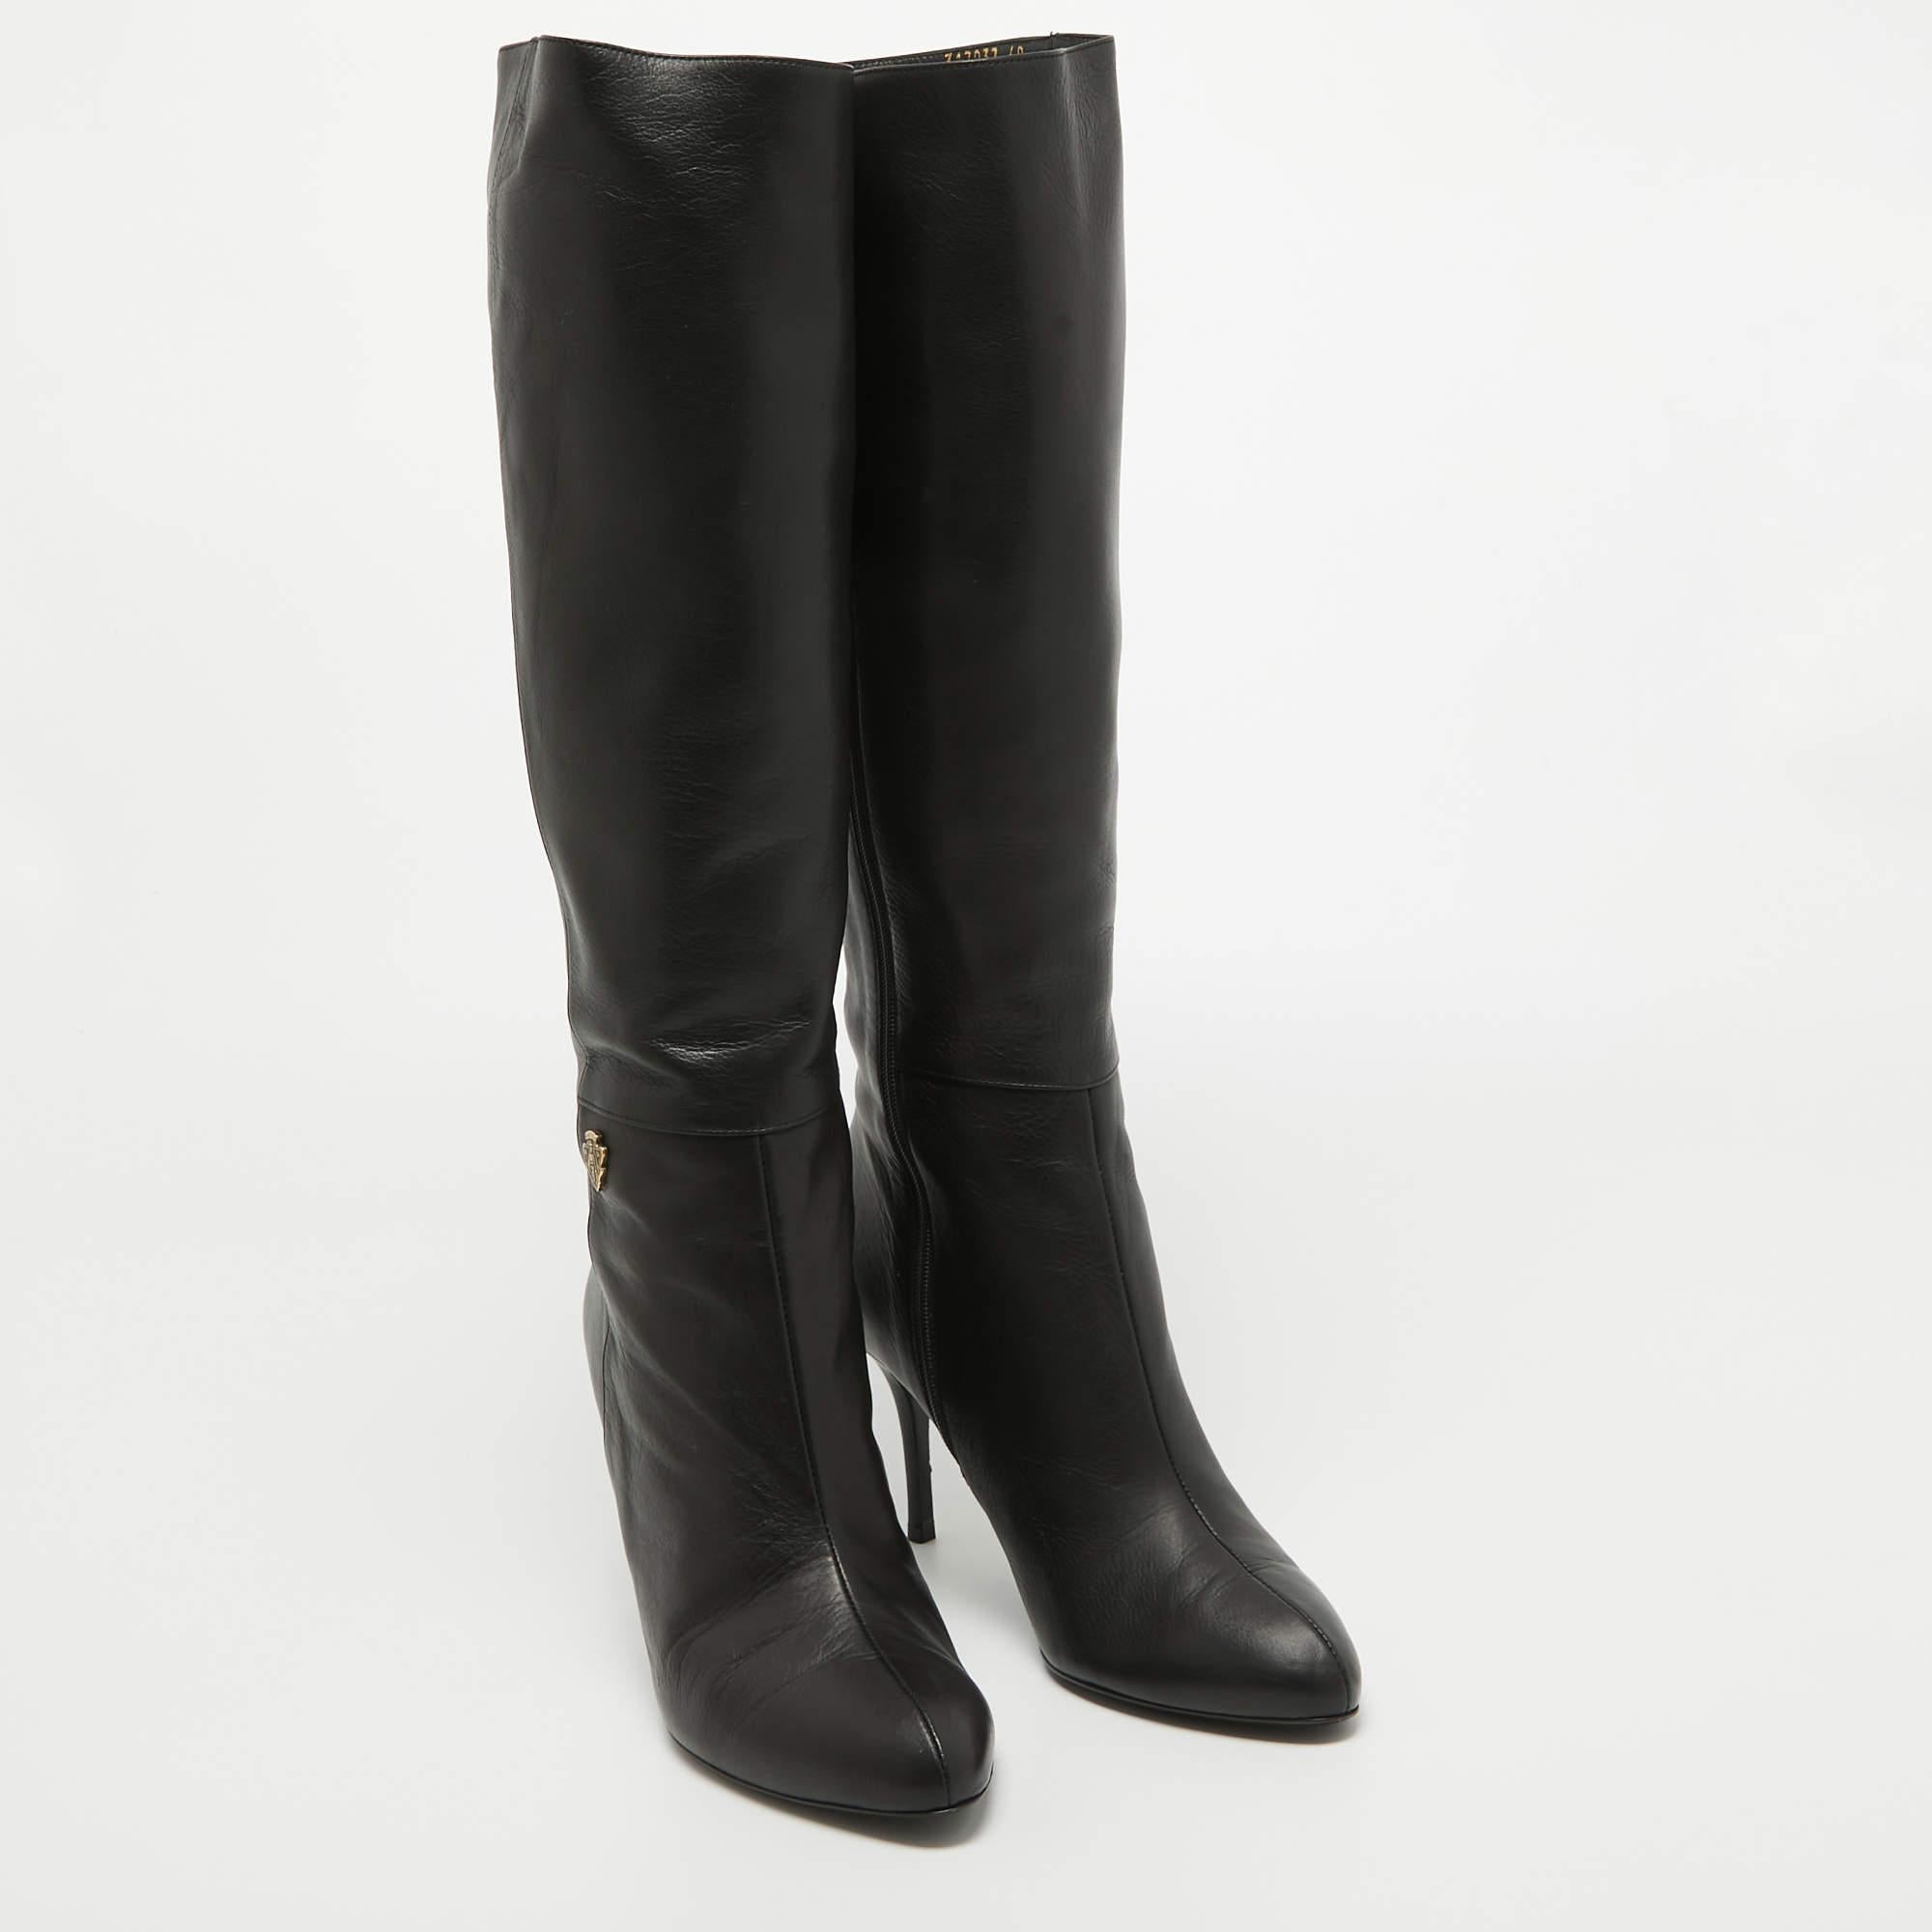 Gucci Black Leather Knee Length Boots Size 40 1